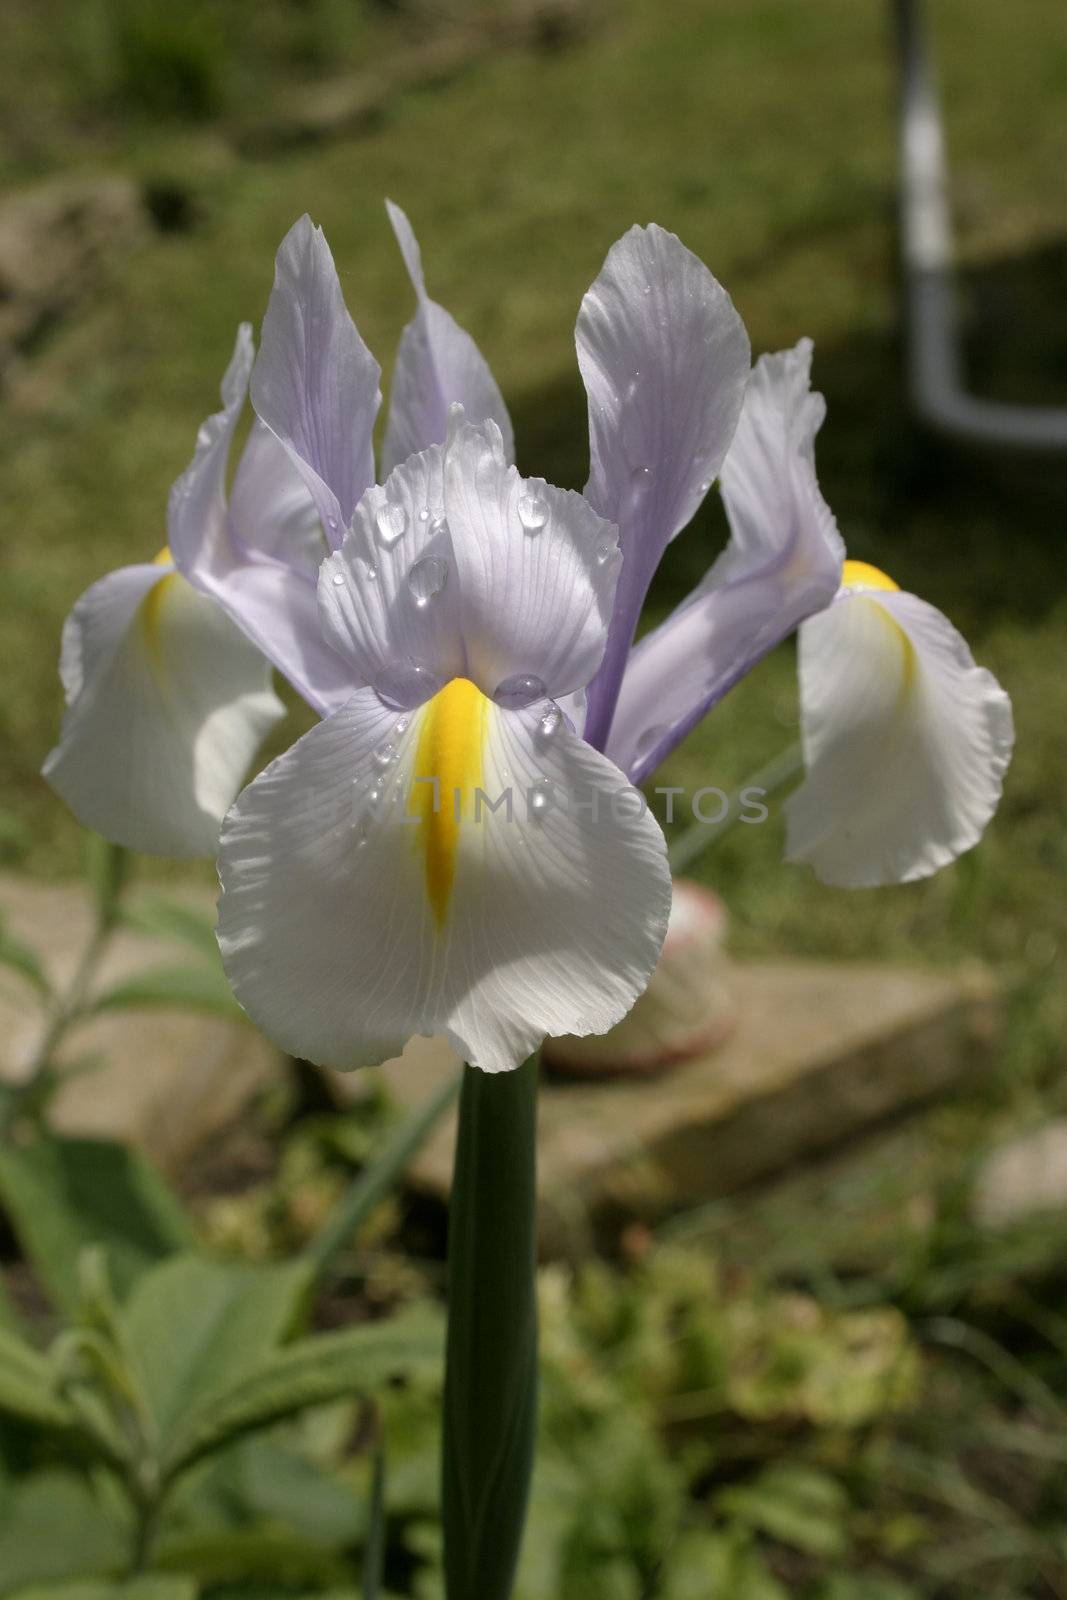 iris after the rain by leafy